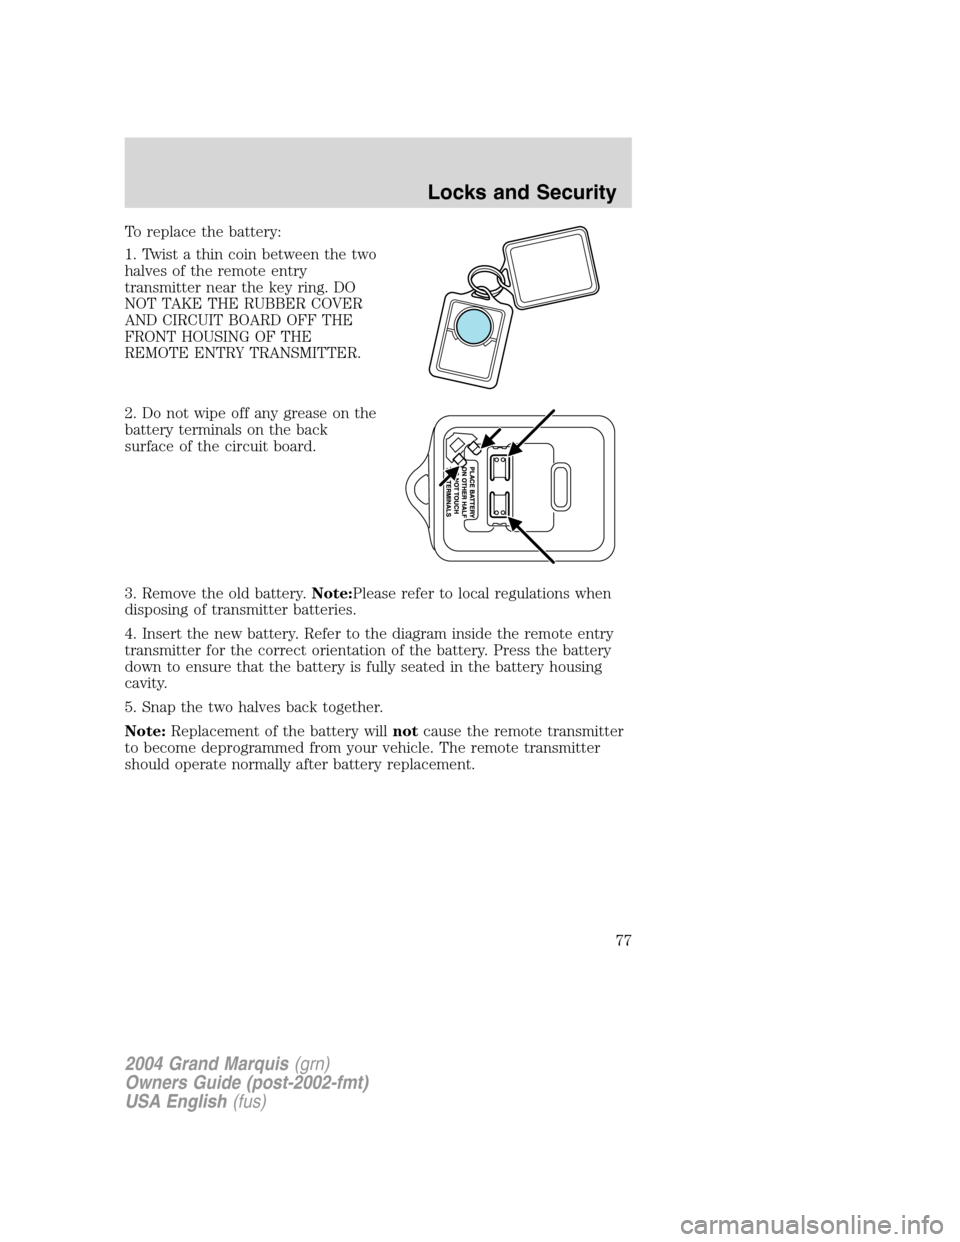 Mercury Grand Marquis 2004  s Manual PDF To replace the battery:
1. Twist a thin coin between the two
halves of the remote entry
transmitter near the key ring. DO
NOT TAKE THE RUBBER COVER
AND CIRCUIT BOARD OFF THE
FRONT HOUSING OF THE
REMOT